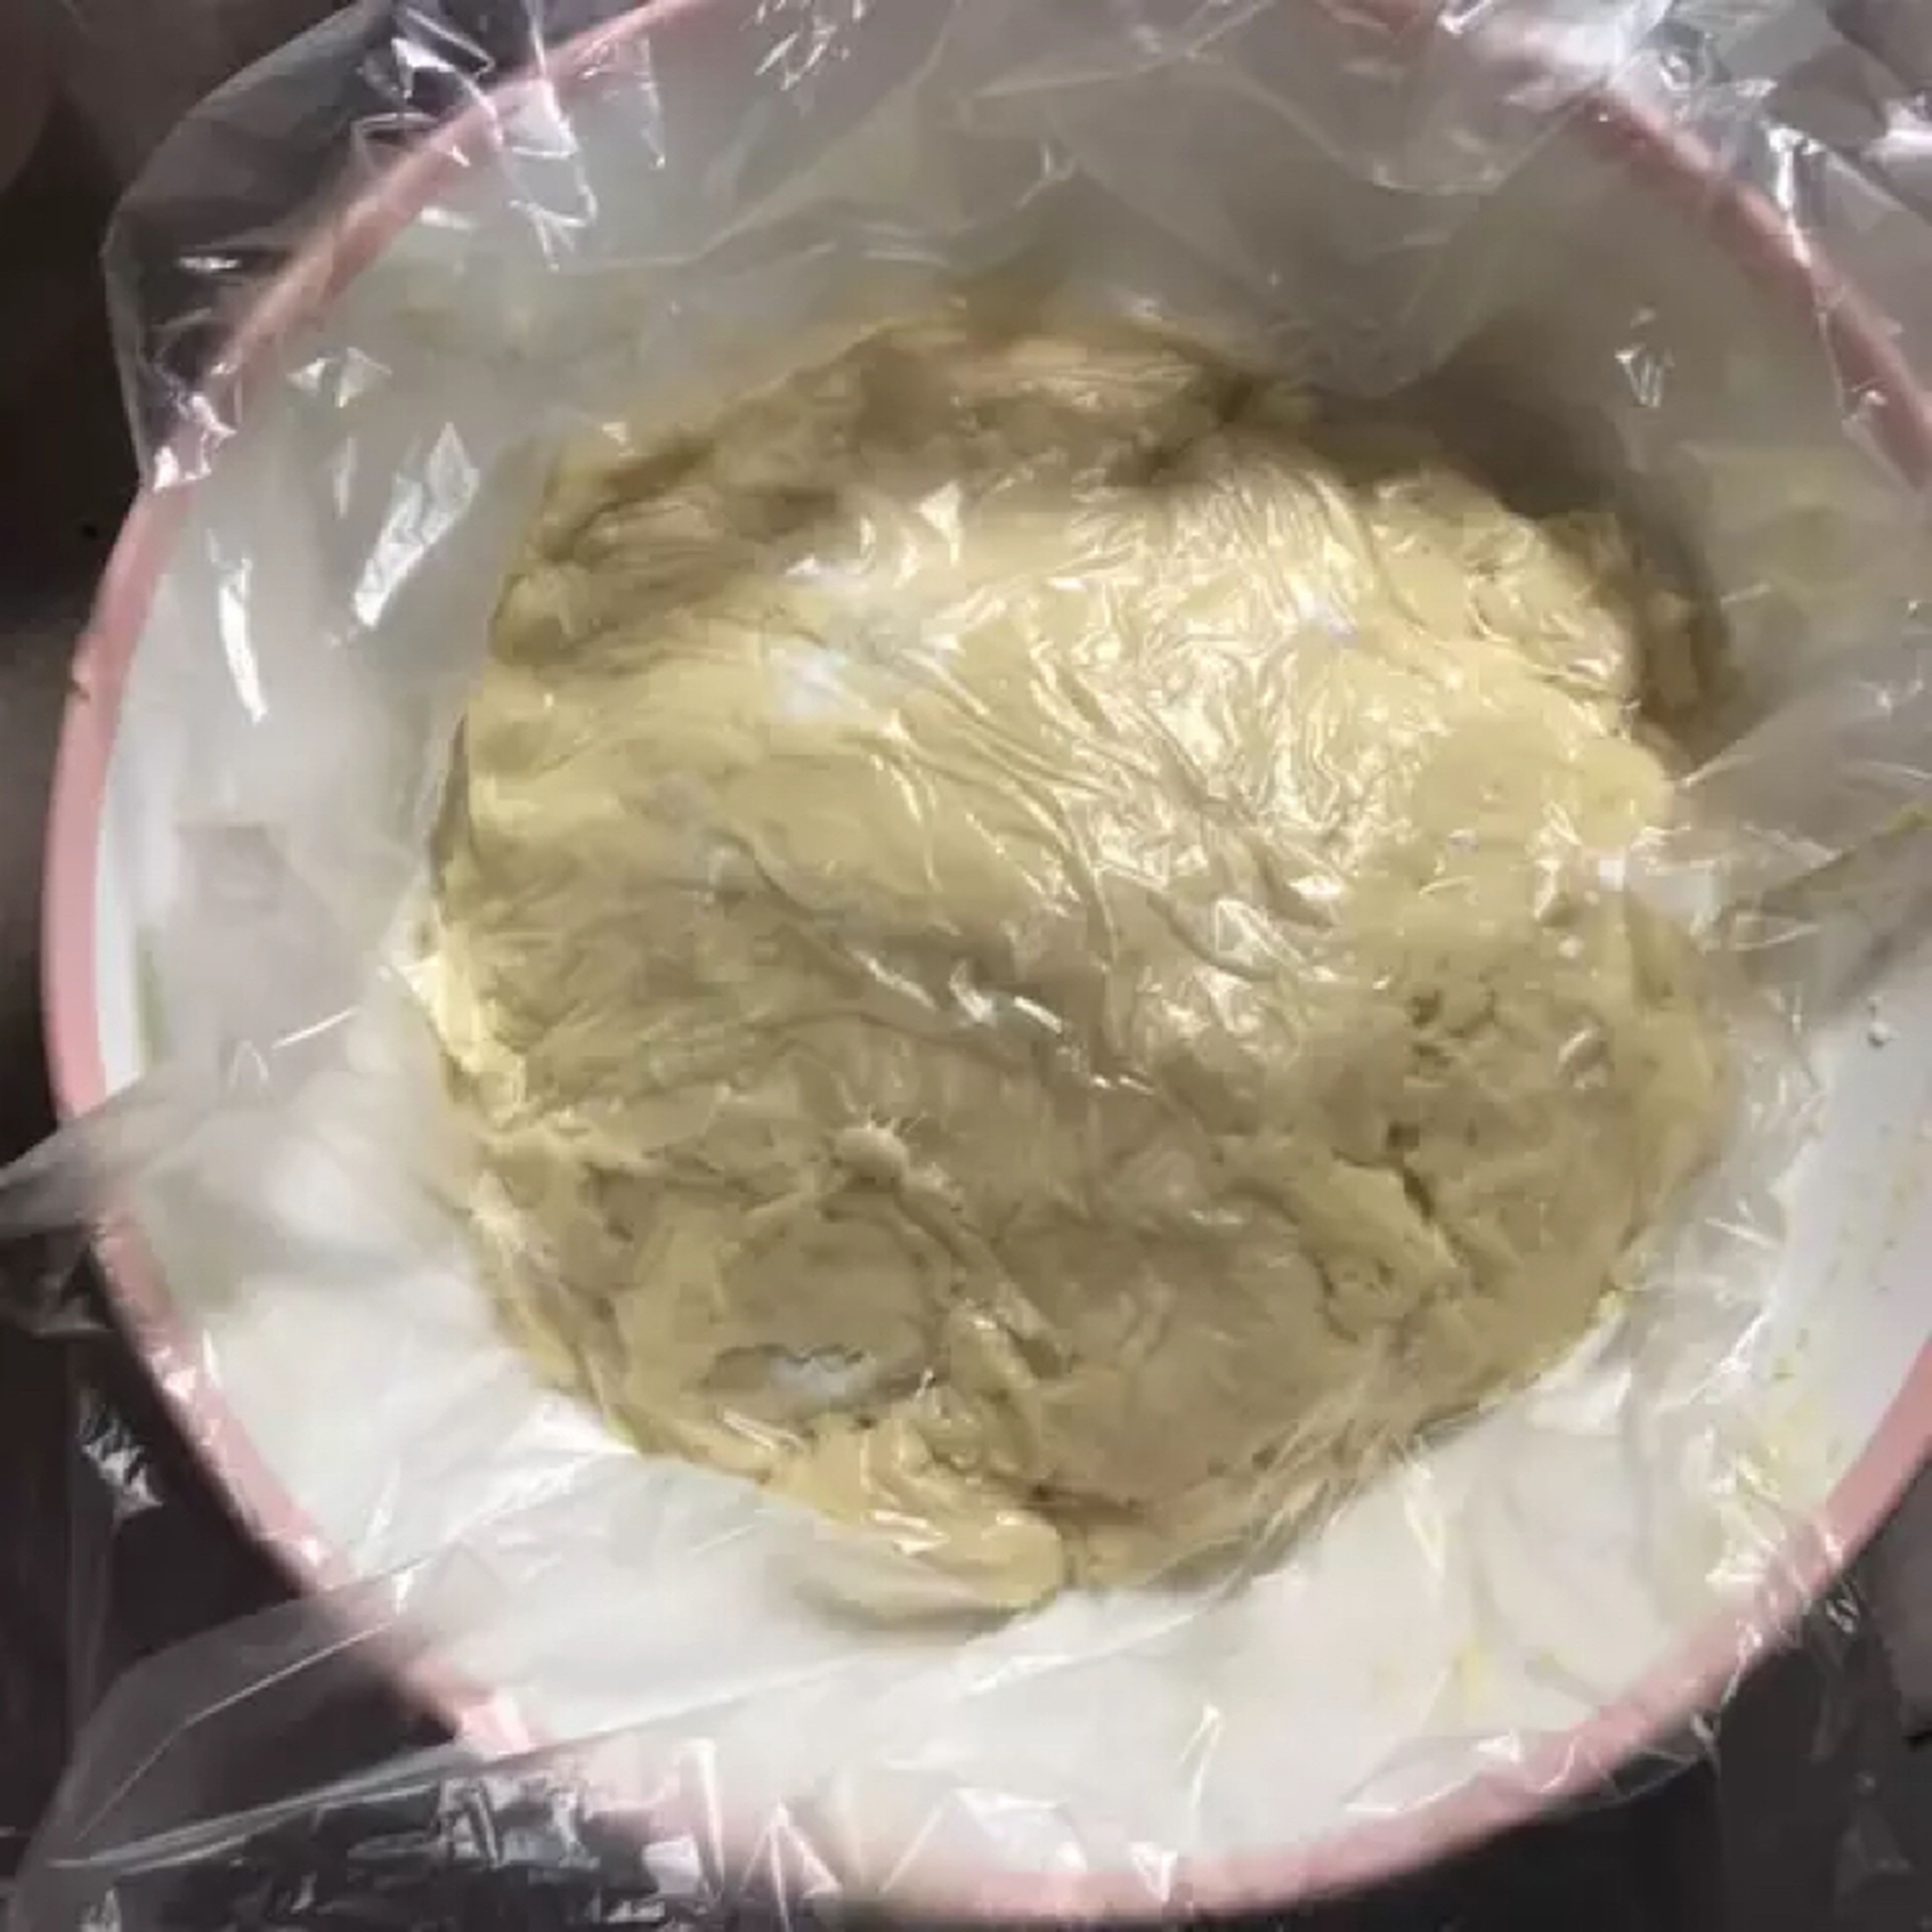 Then add the flour little by little and mix until the dough remains a little sticky. Cover the dough with a freezer bag and set aside for three hours. After resting, the stickiness of the dough becomes very low.